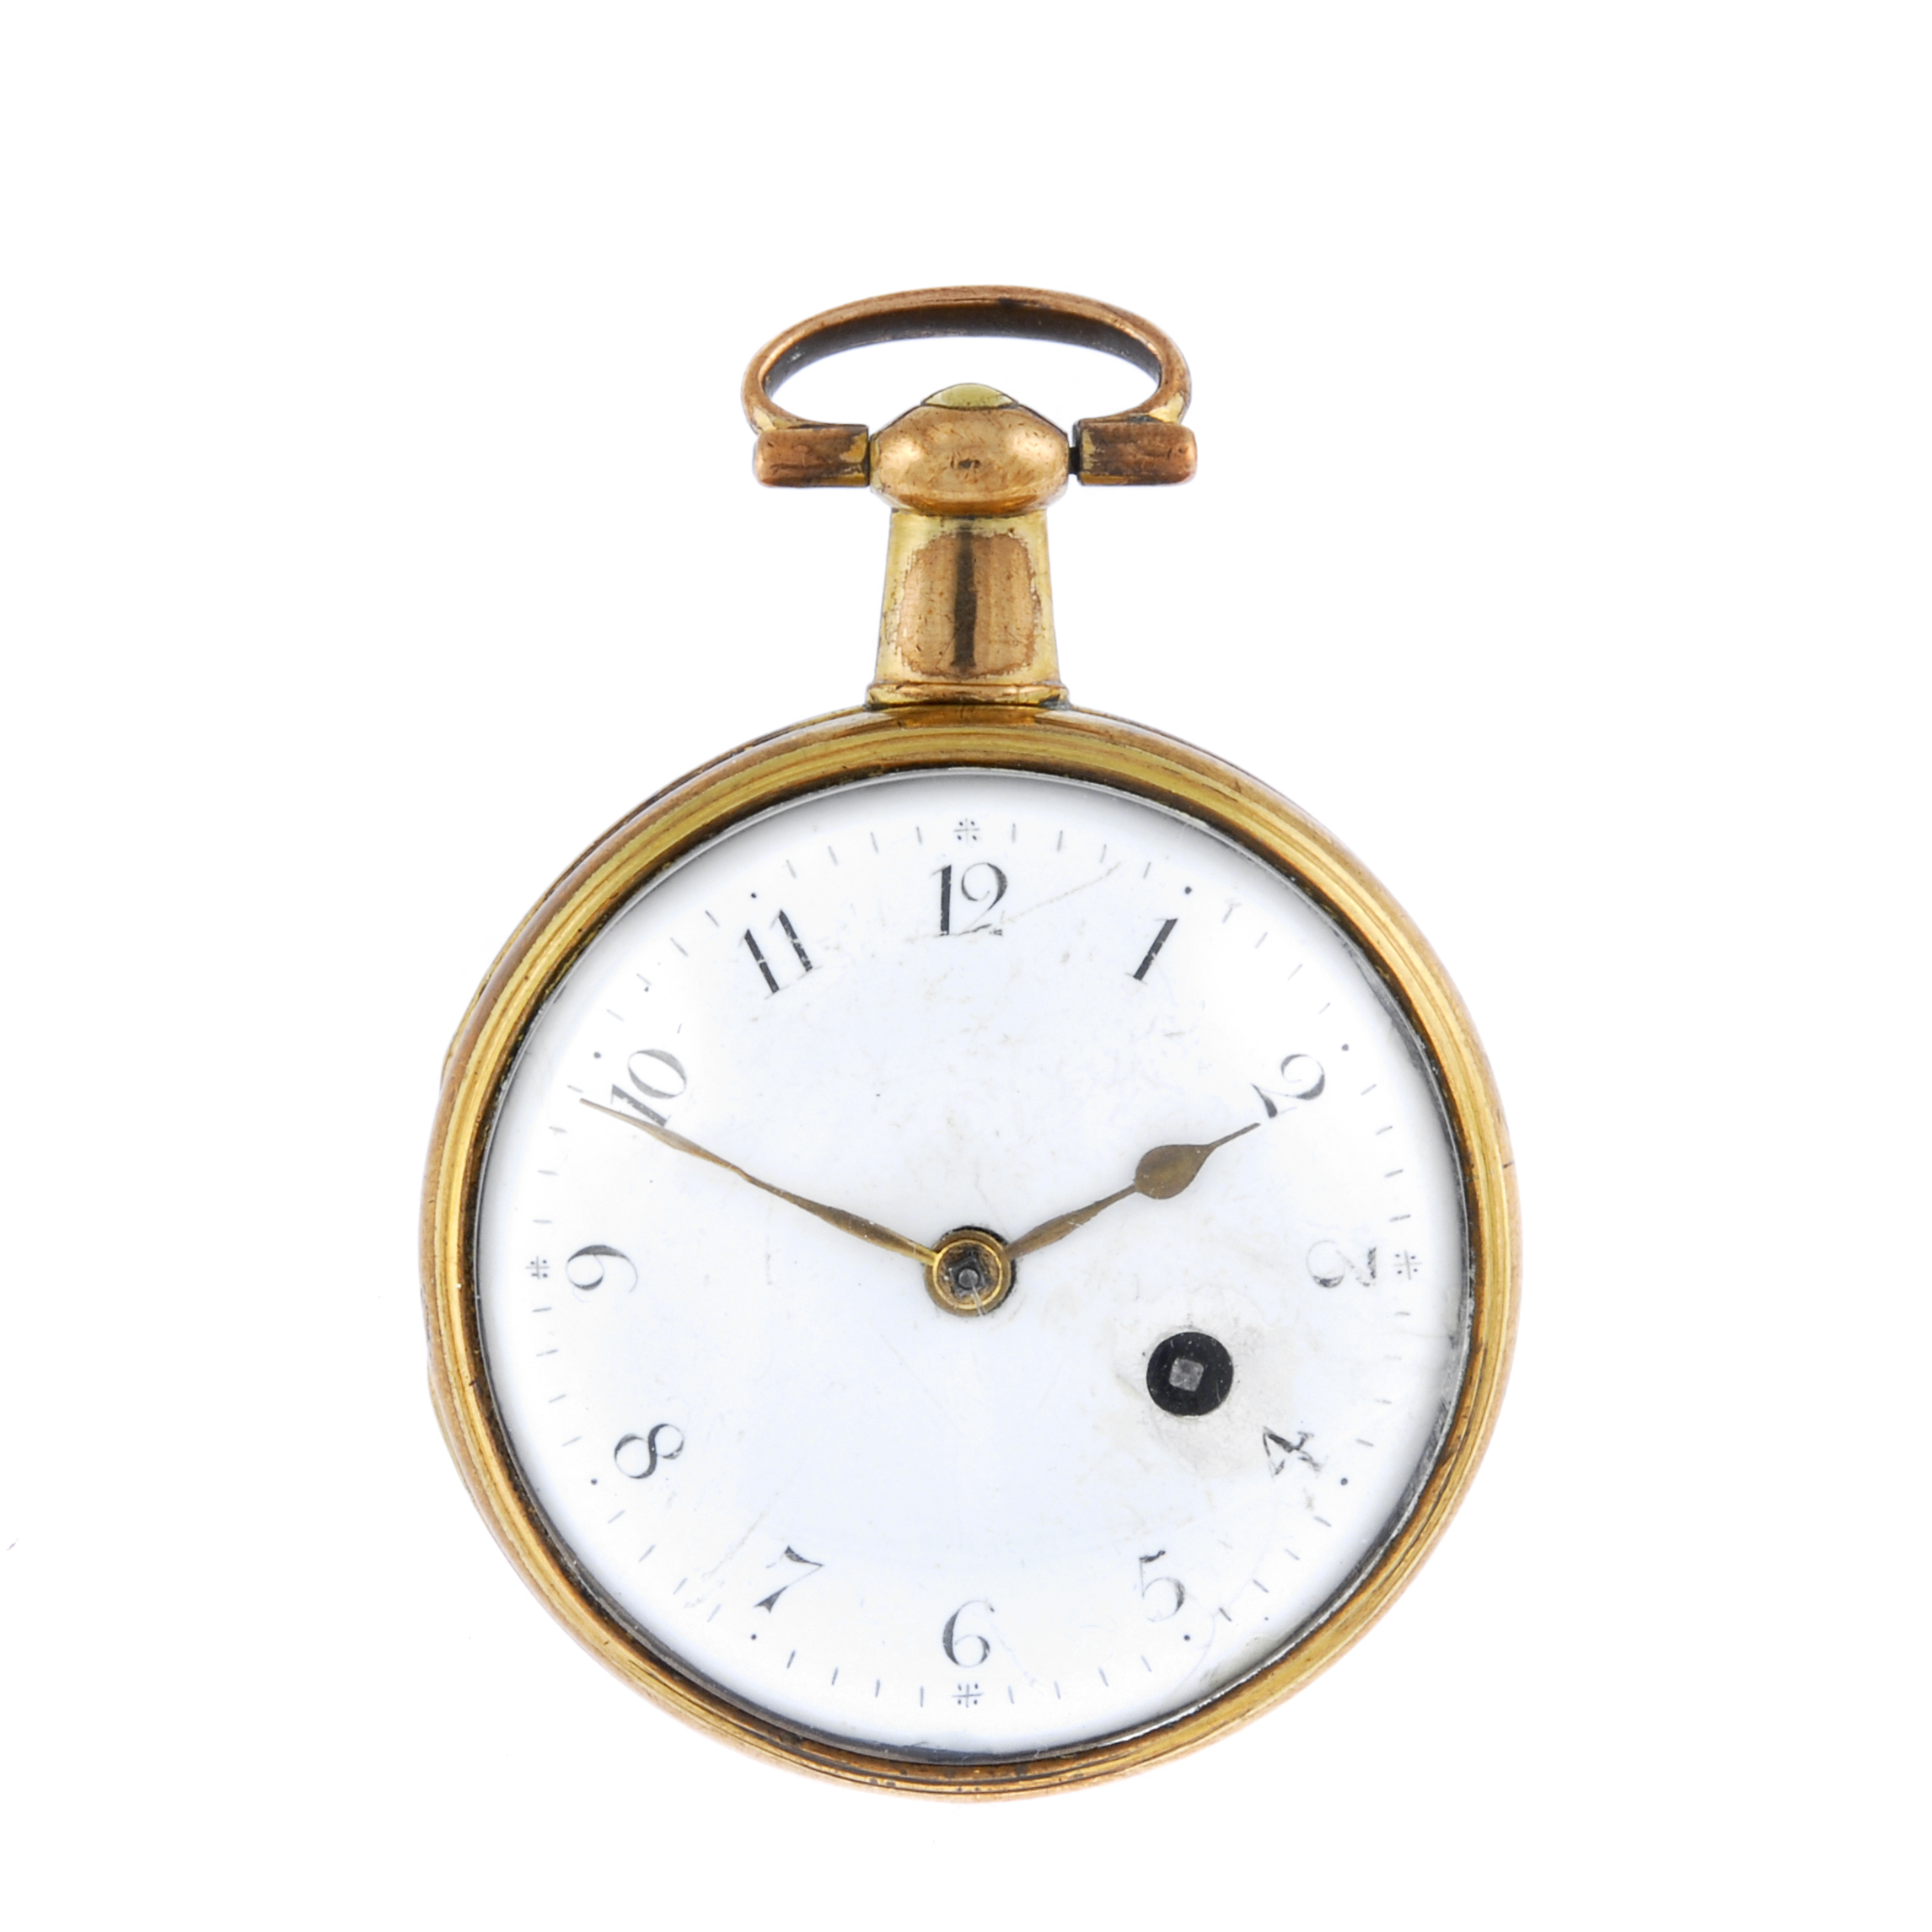 An open face pocket watch by Thomas Welter. Yellow metal case. Numbered 5941. Signed key wind full